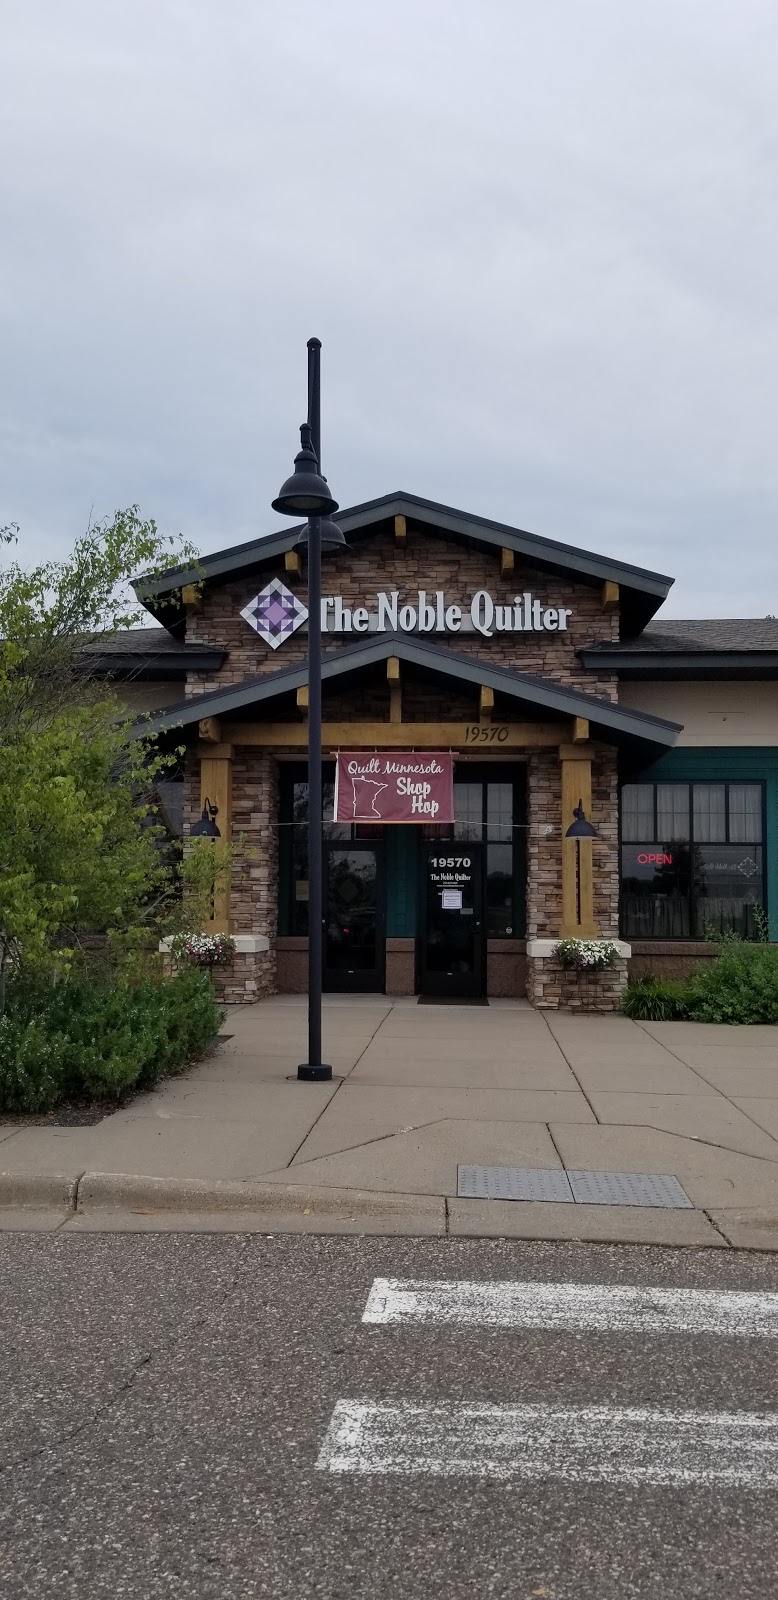 The Noble Quilter | 19570 Holt St NW, Elk River, MN 55330 | Phone: (763) 633-4669